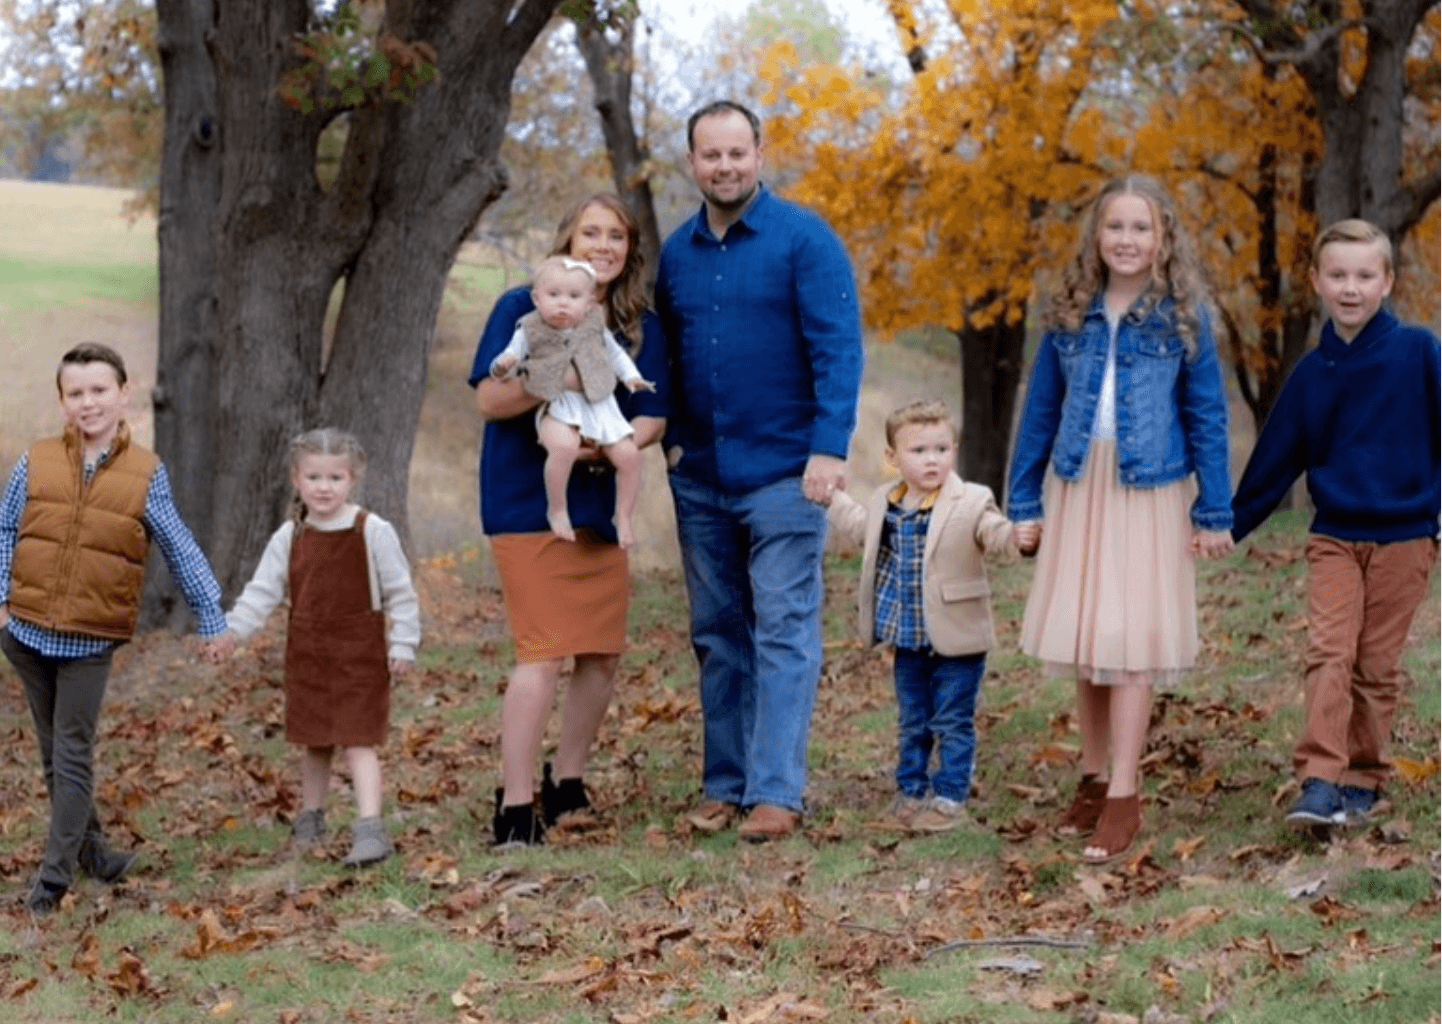 How Can Anna Duggar Provide For 7 Kids With Husband Josh Behind Bars?